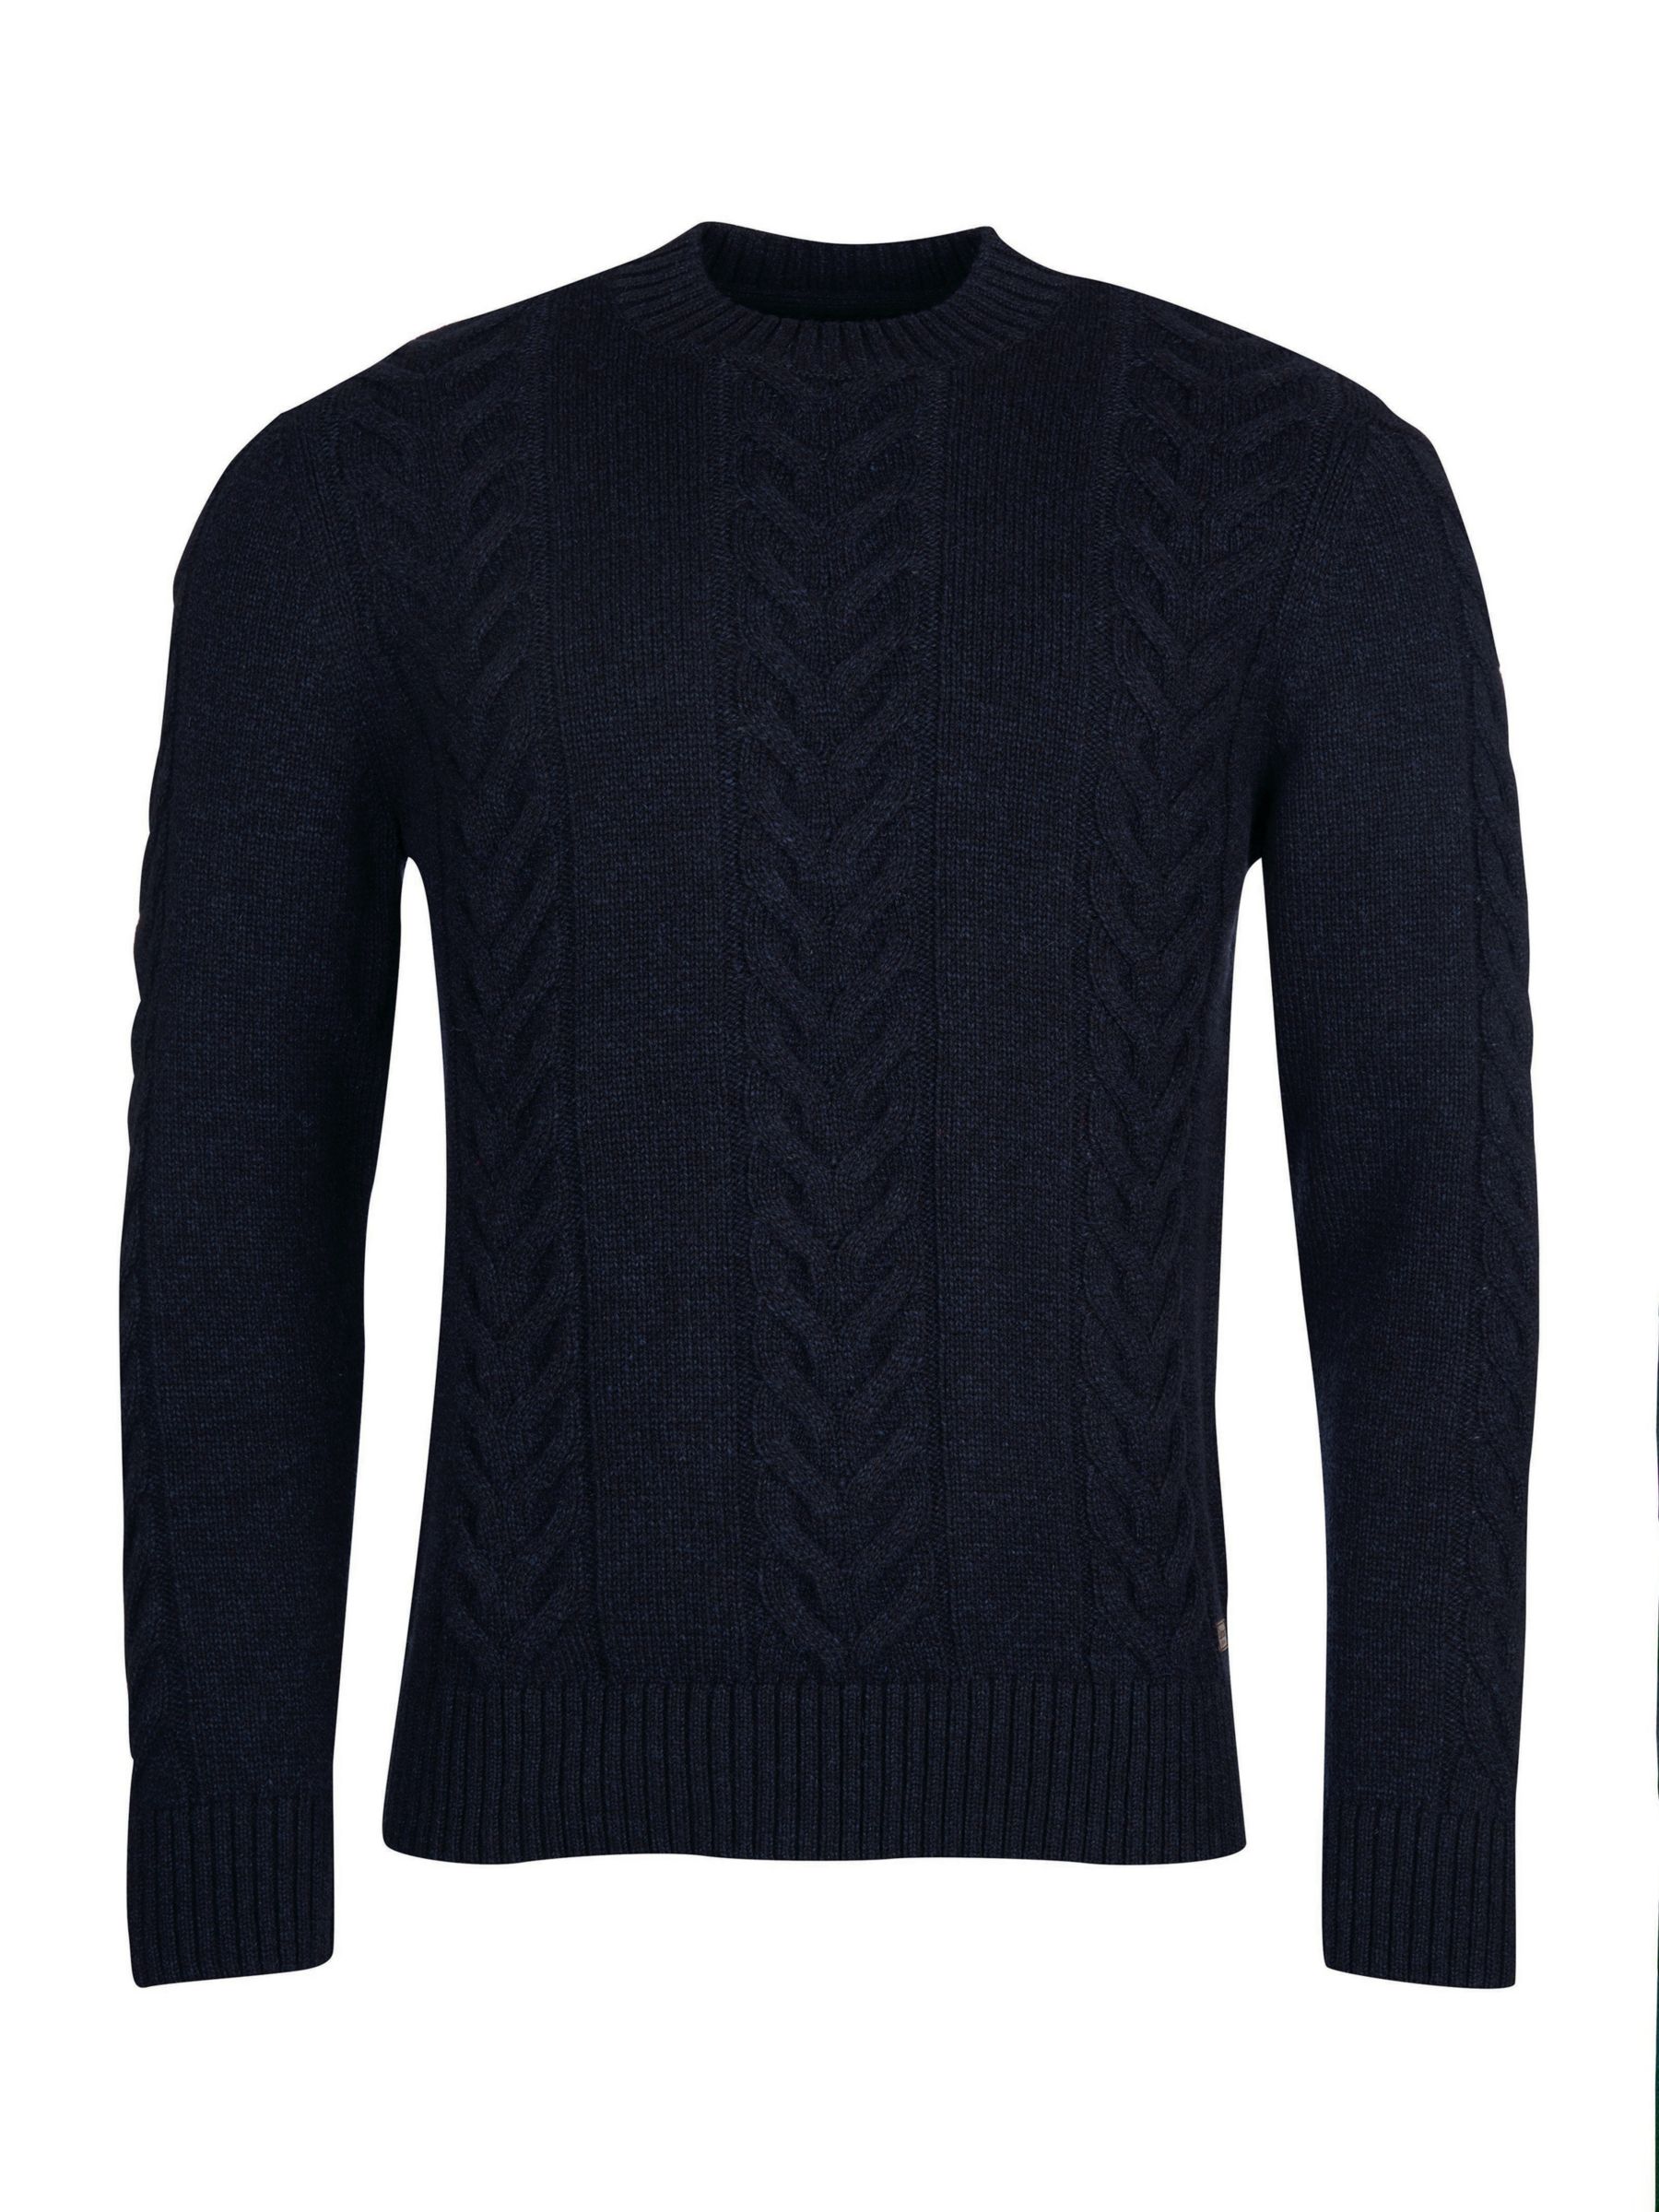 Barbour Lifestyle Cable Knit Jumper, Navy Marl at John Lewis & Partners